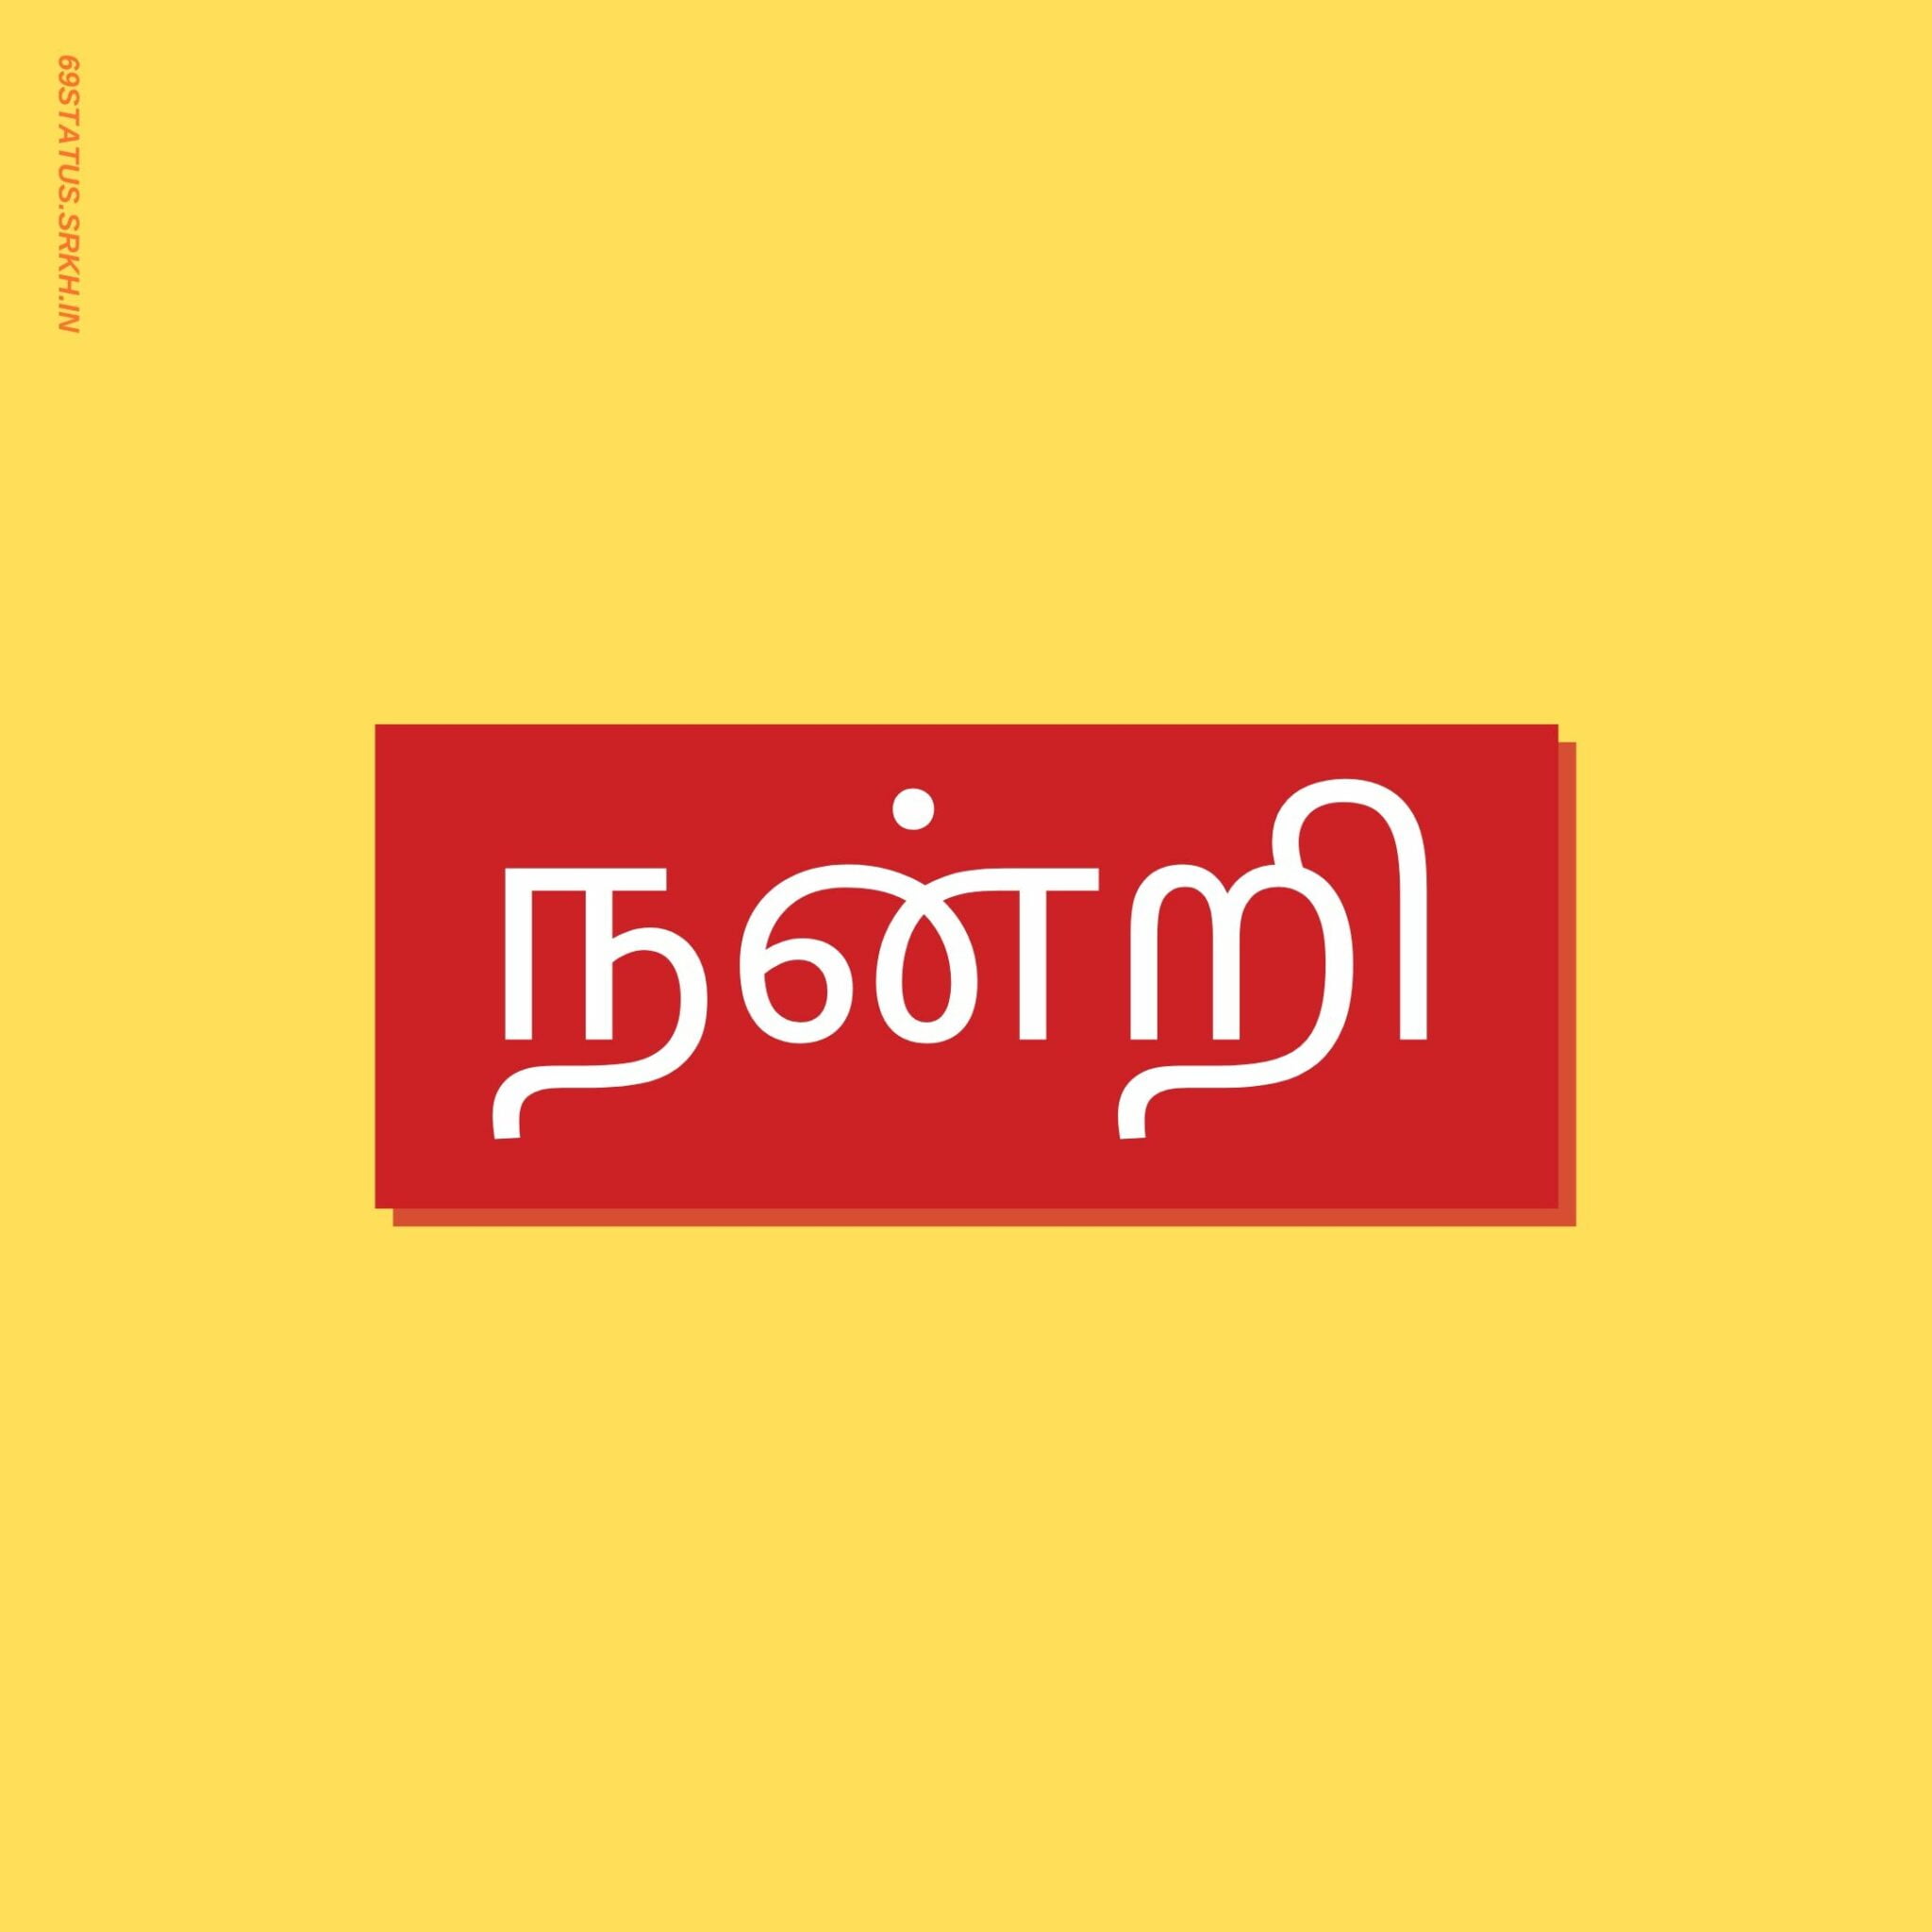 Thank You Images in Tamil in FHD